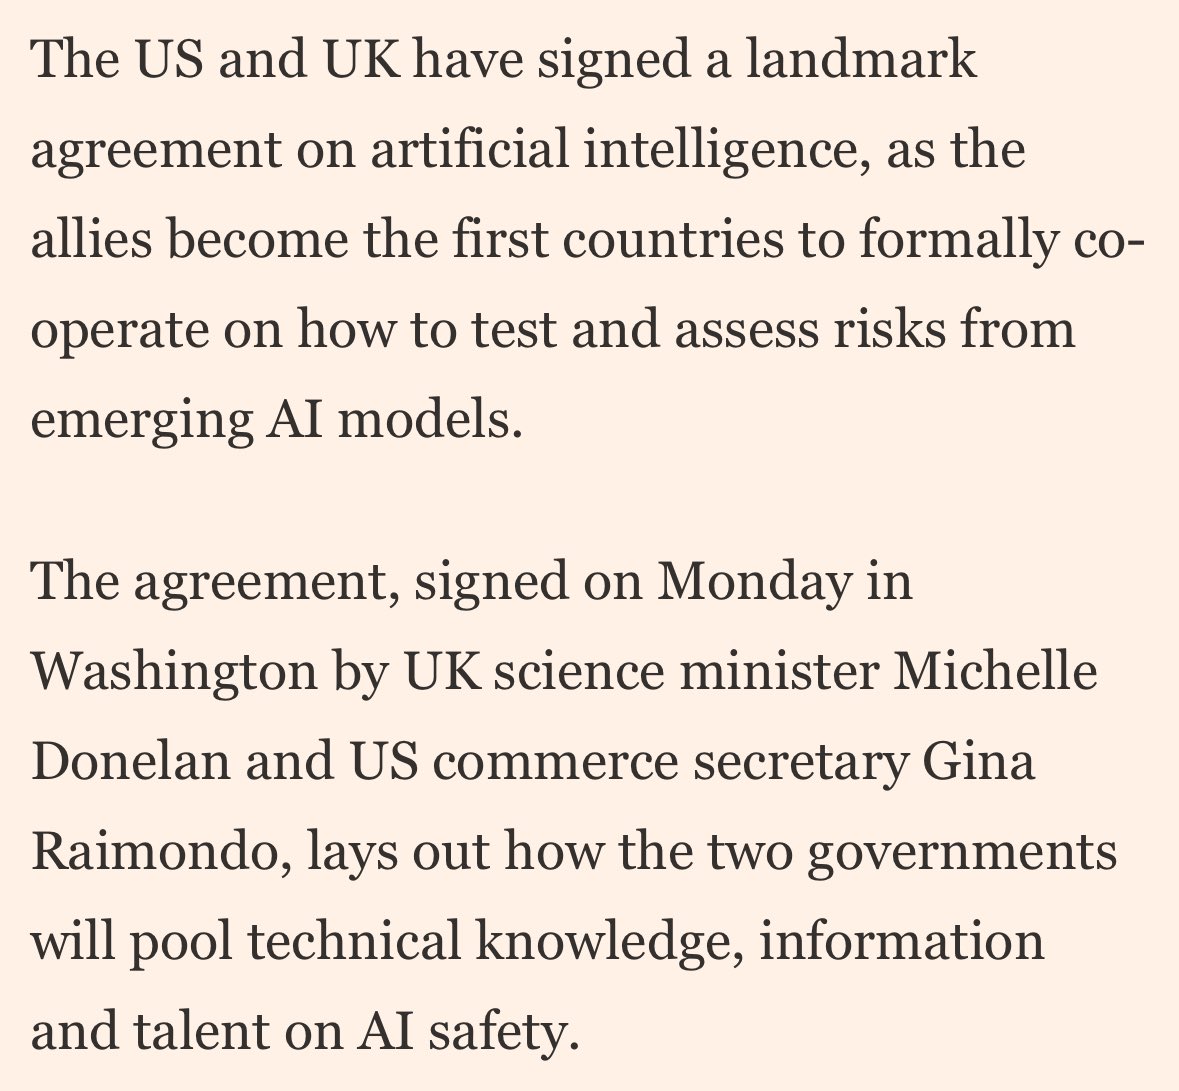 This is a big deal - and further underlines the amazing progress the UK has made on state capacity in AI. Congratulations to the whole AISI team!